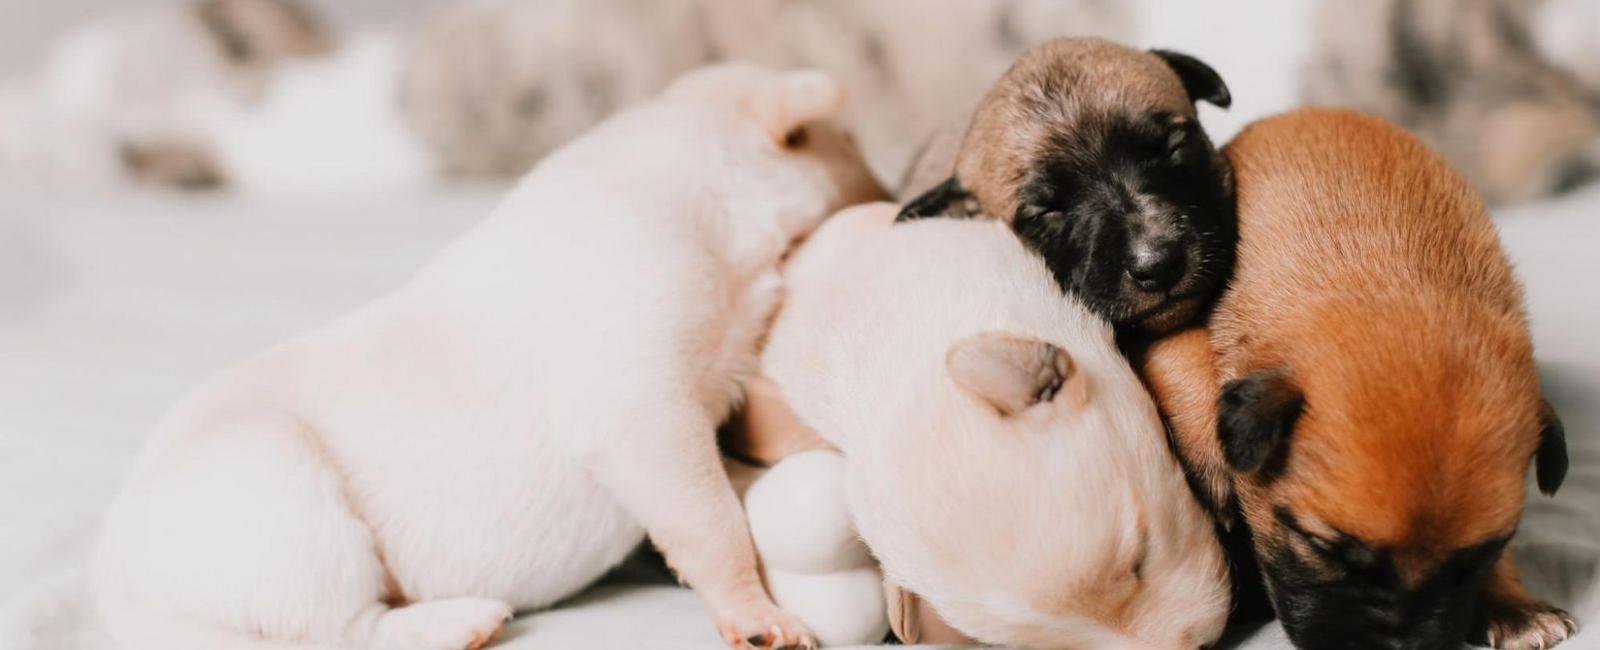 Dog Pregnancy: When Can You Feel Puppies Move?